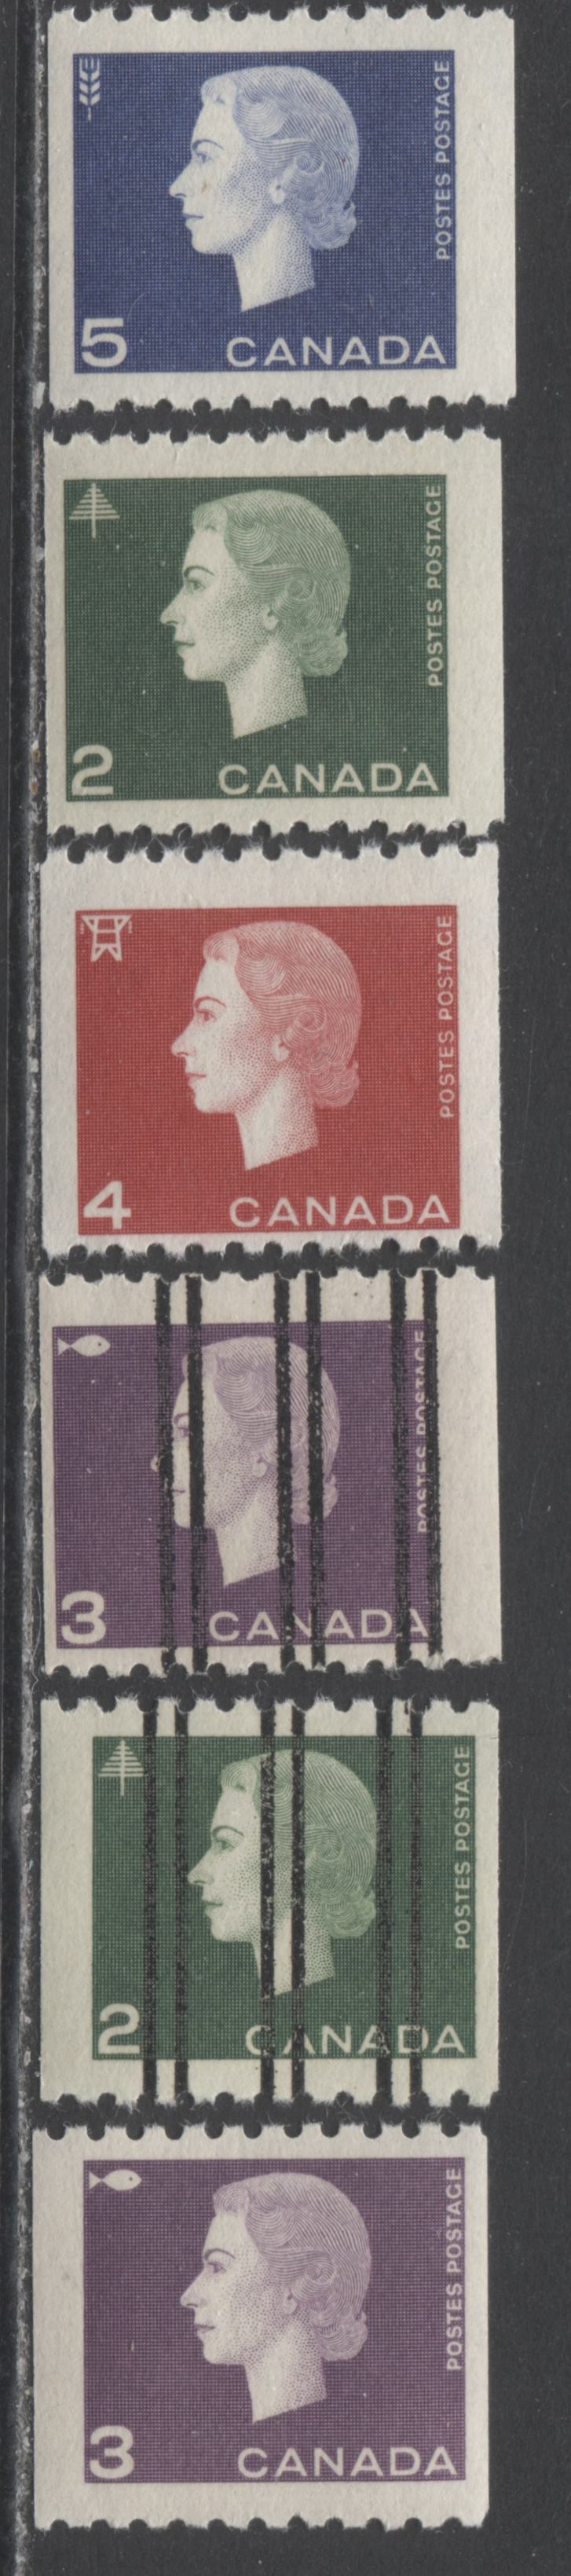 Lot 183 Canada #406-409, 406xx-407xx 2c-5c Green-Violet Blue Forestry-Agriculture, 1962-1963 Cameo Coil Issue, 6 FNH Precancelled & Coil Singles